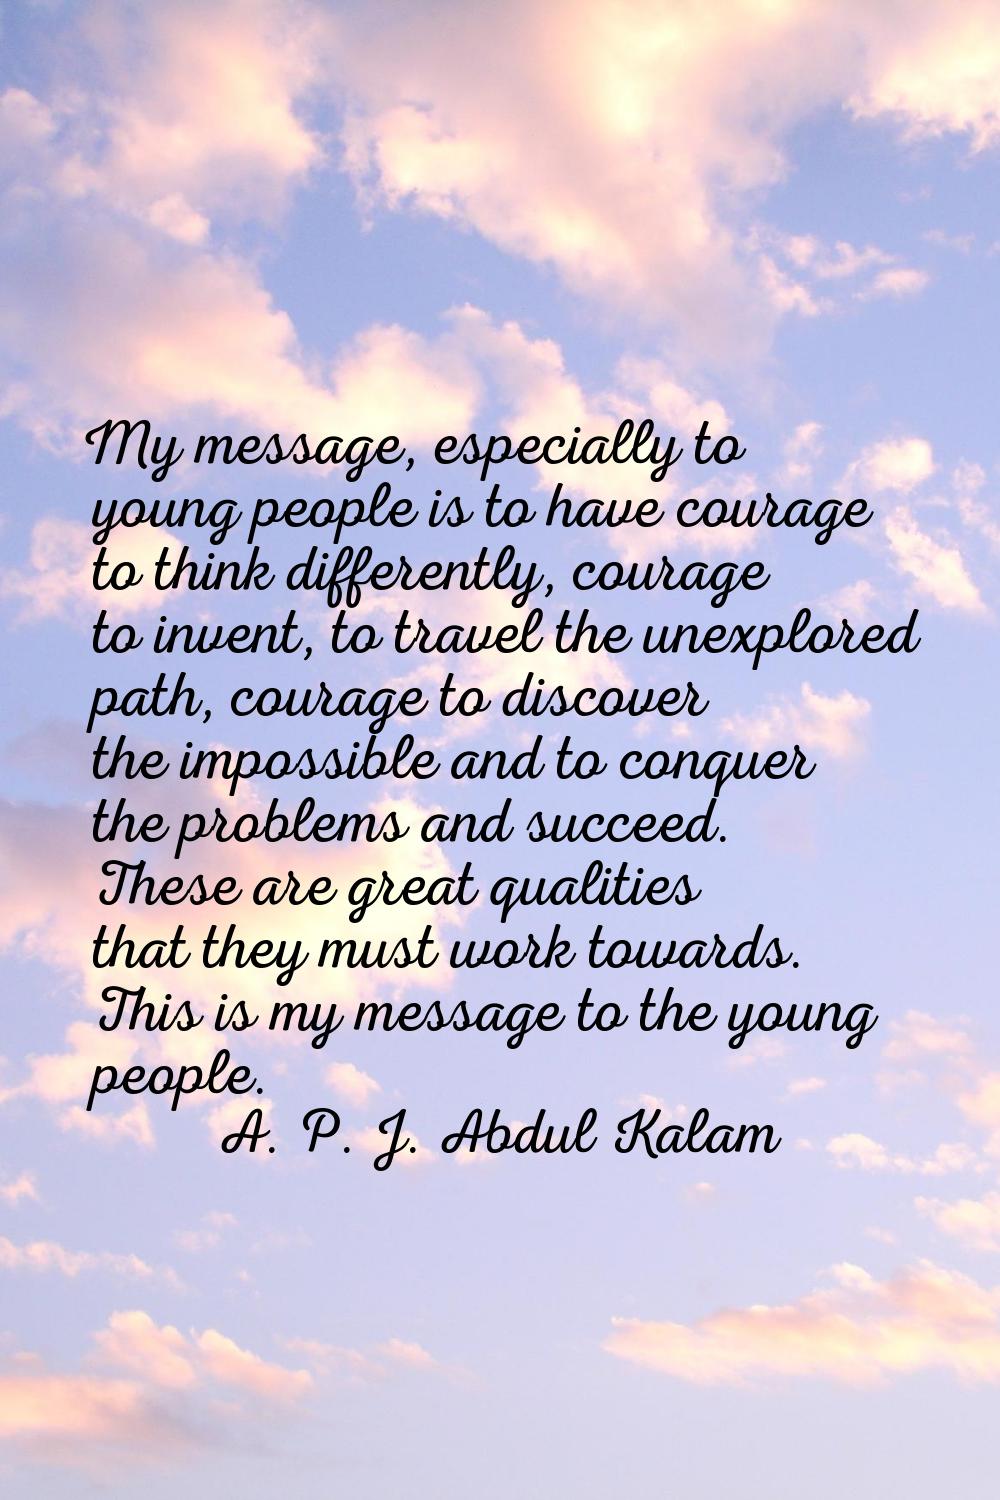 My message, especially to young people is to have courage to think differently, courage to invent, 